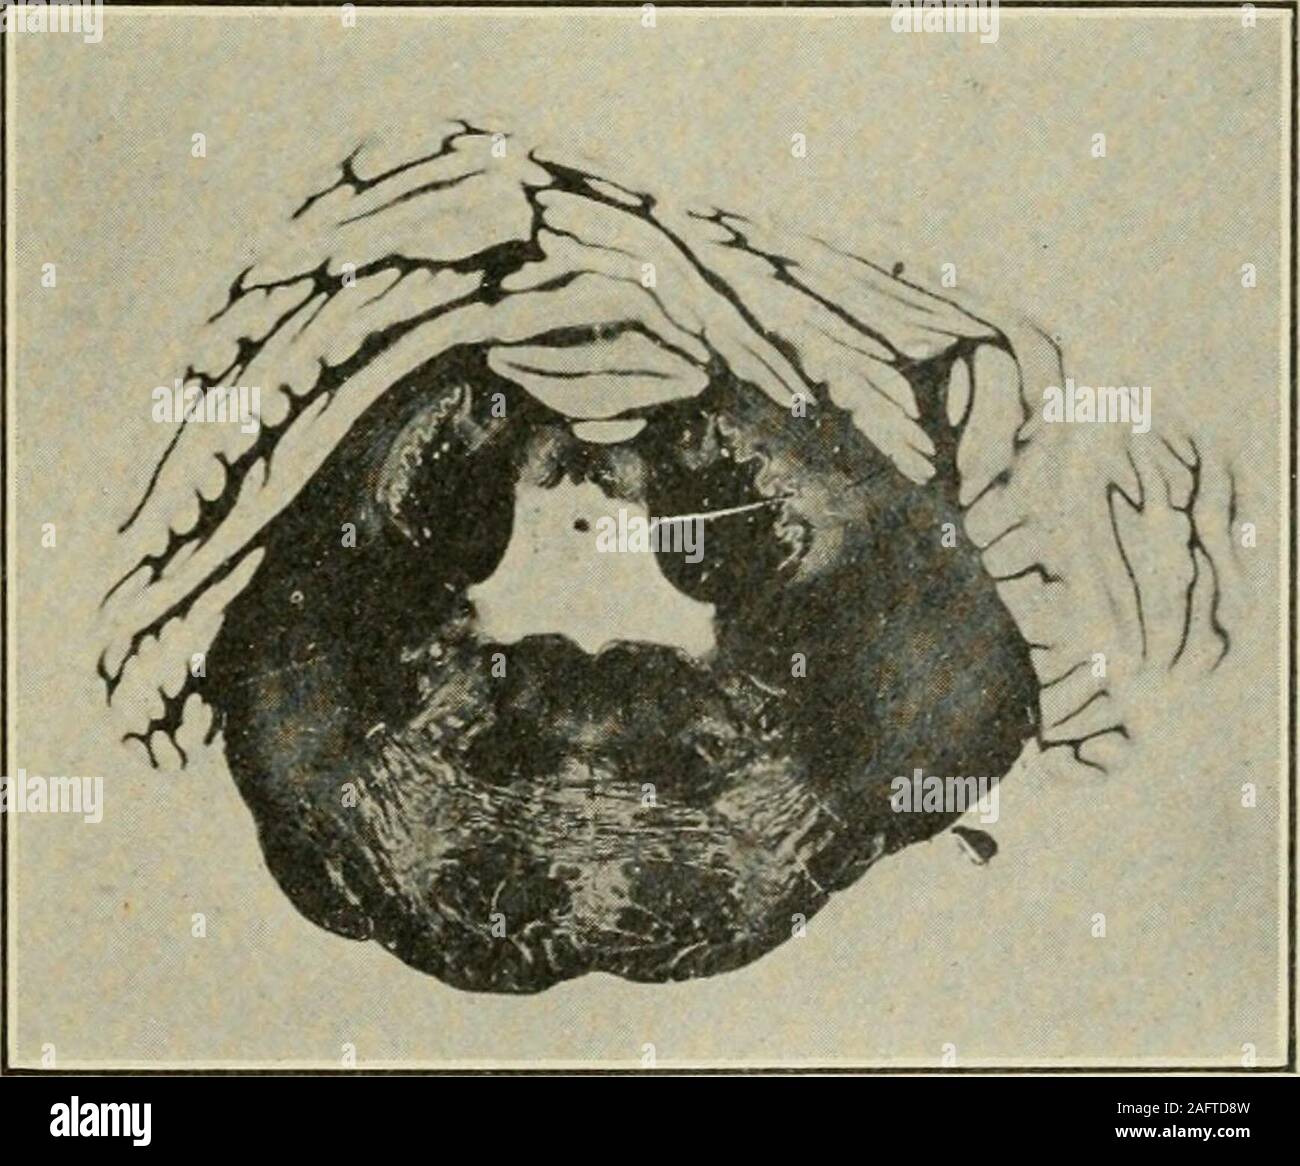 . The Journal of nervous and mental disease. Fig. 8. Section through the anterior extremity of the right corpus den-tatum and the trigeminal level of the pons. Peculiar asymmetry of the hemi-spheral lobules. bundle. The accessory olivary bodies, the nuclei of the lateralcolumns, the arcuate nuclei and the antero-external and postero-external arcuate fiber systems as well as the nuclei of the posteriorcolumns are all perfectly normal. At the lateral margin of thelower medulla on both sides the domain of the dorsal spino-cere-bellar tract is less deeply stained than the surrounding white matter, Stock Photo